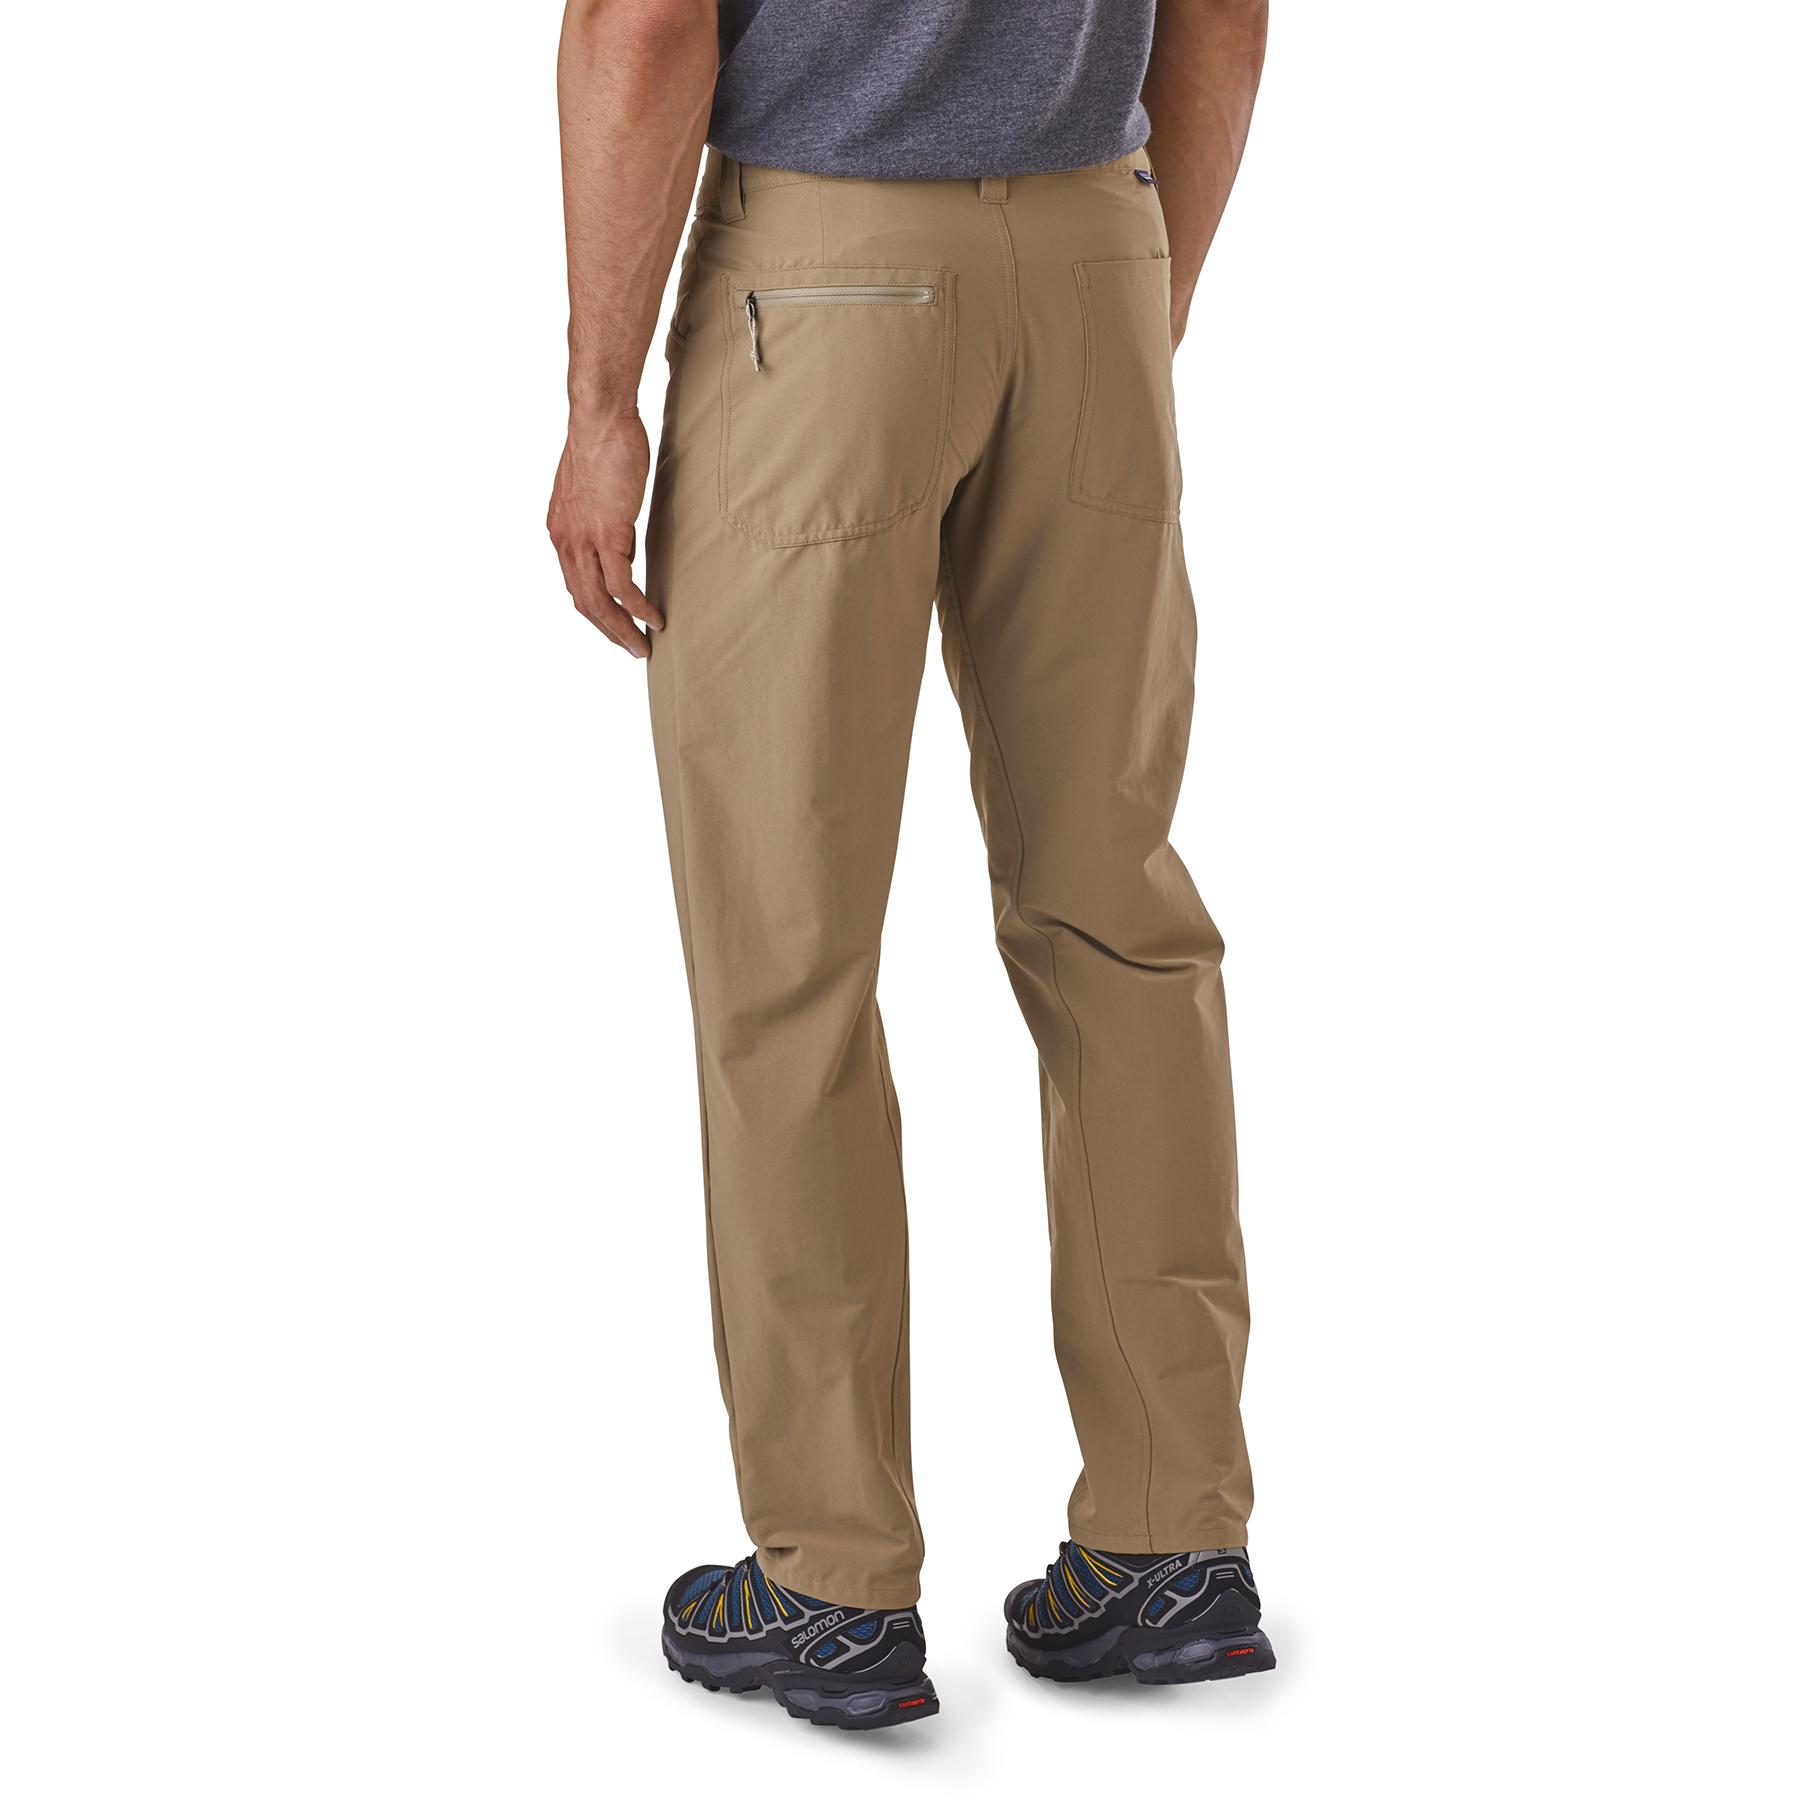 Whole Provision | PATAGONIA Patagonia Men's Quandary Pants 30in Inseam